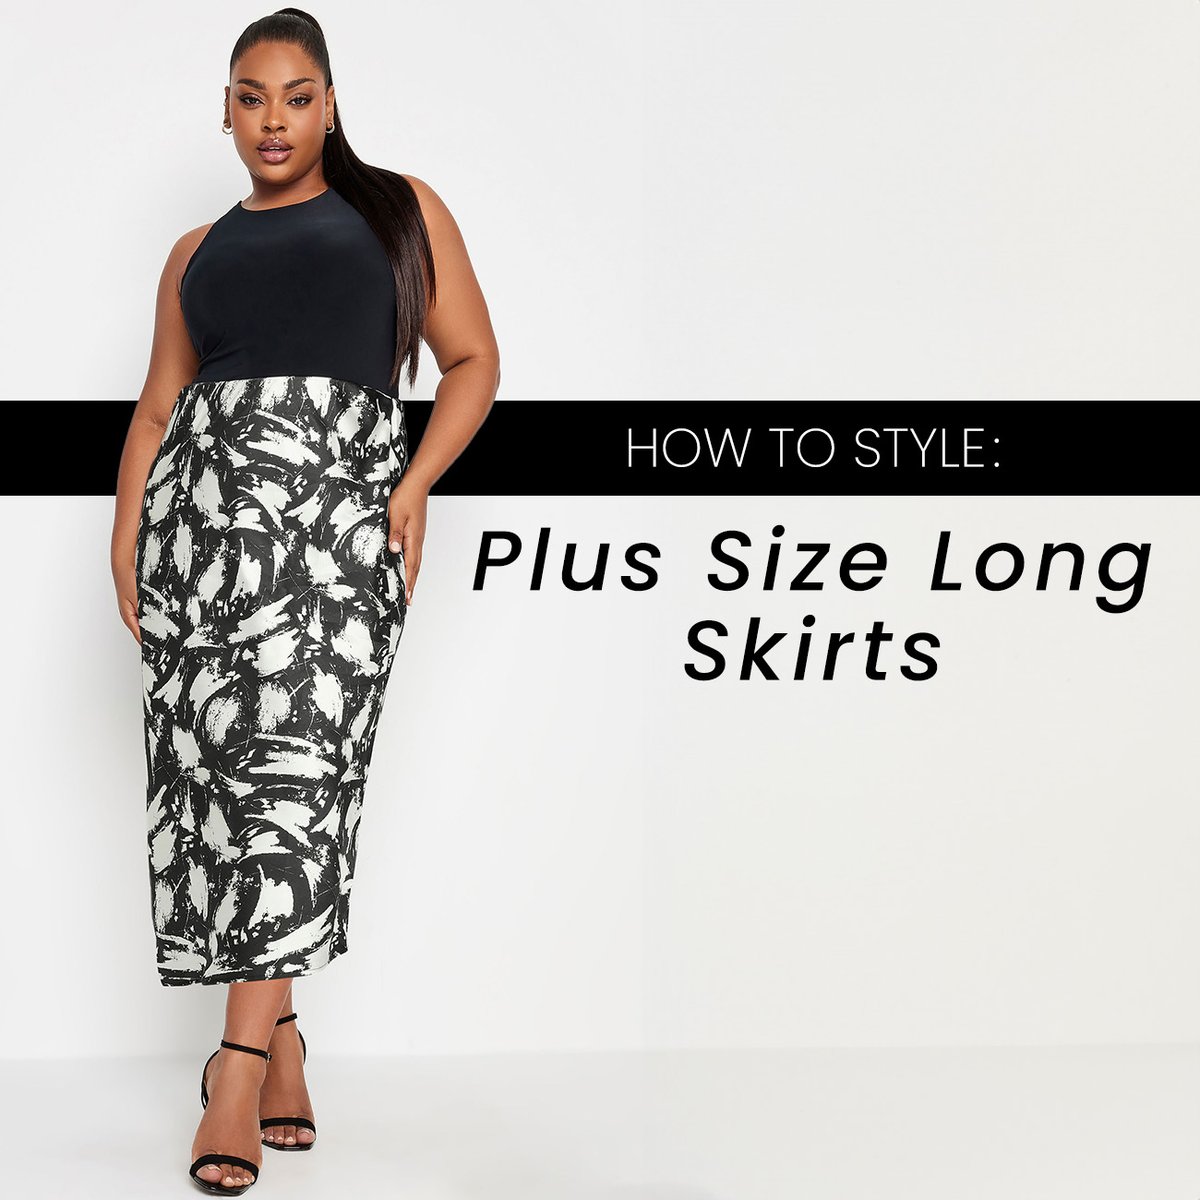 Not sure how to style the latest trending skirts? Read our latest blog for style inspiration on how to style long skirts this season👉 bit.ly/49qsaLn